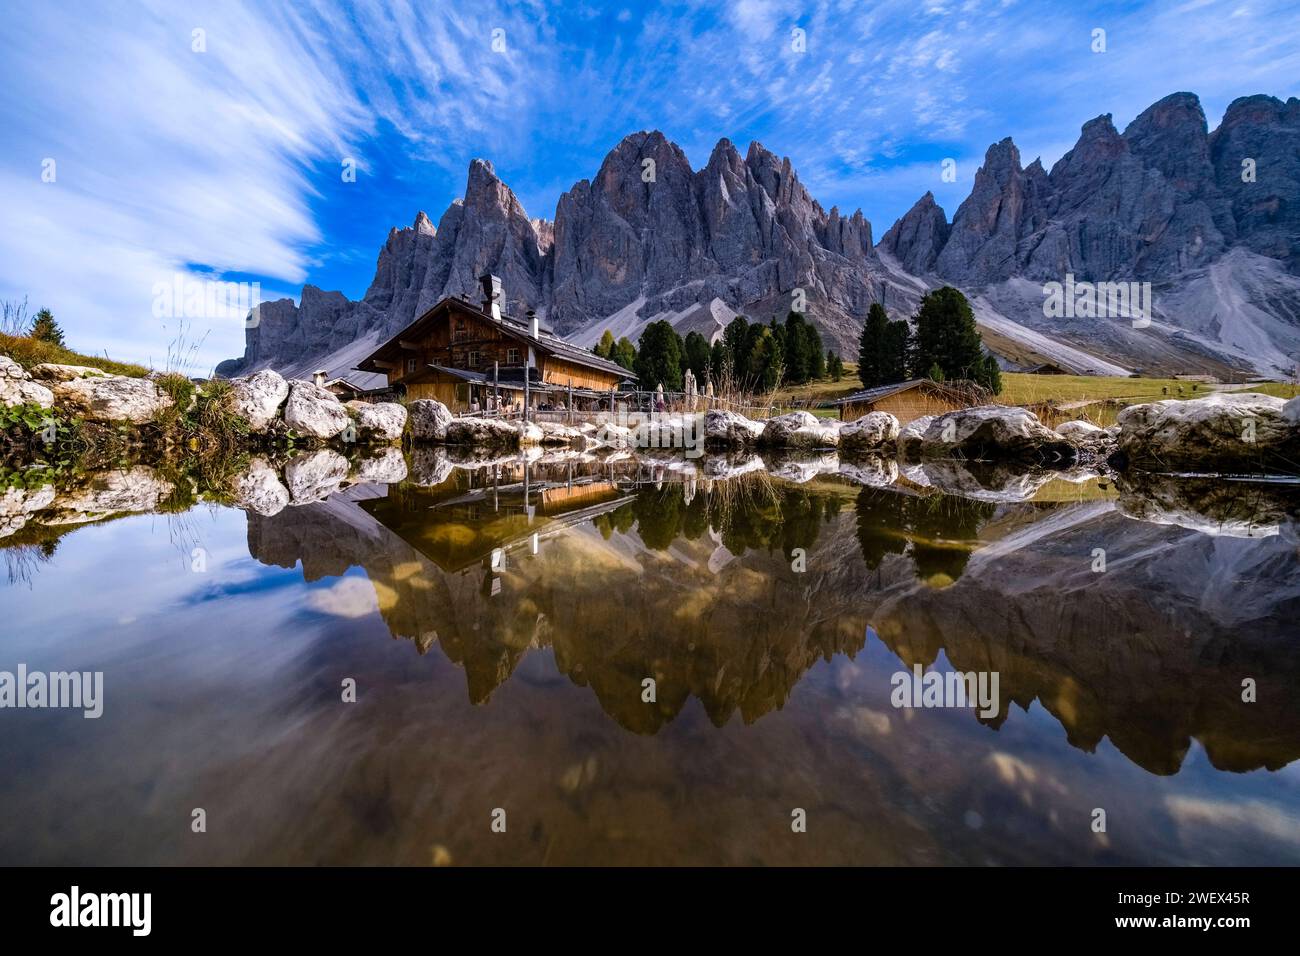 North faces and summits of Odle group and the mountain hut Geisler Alm, Rifugio delle Odle, reflected in a small pool. Bolzano Trentino-Alto Adige Ita Stock Photo